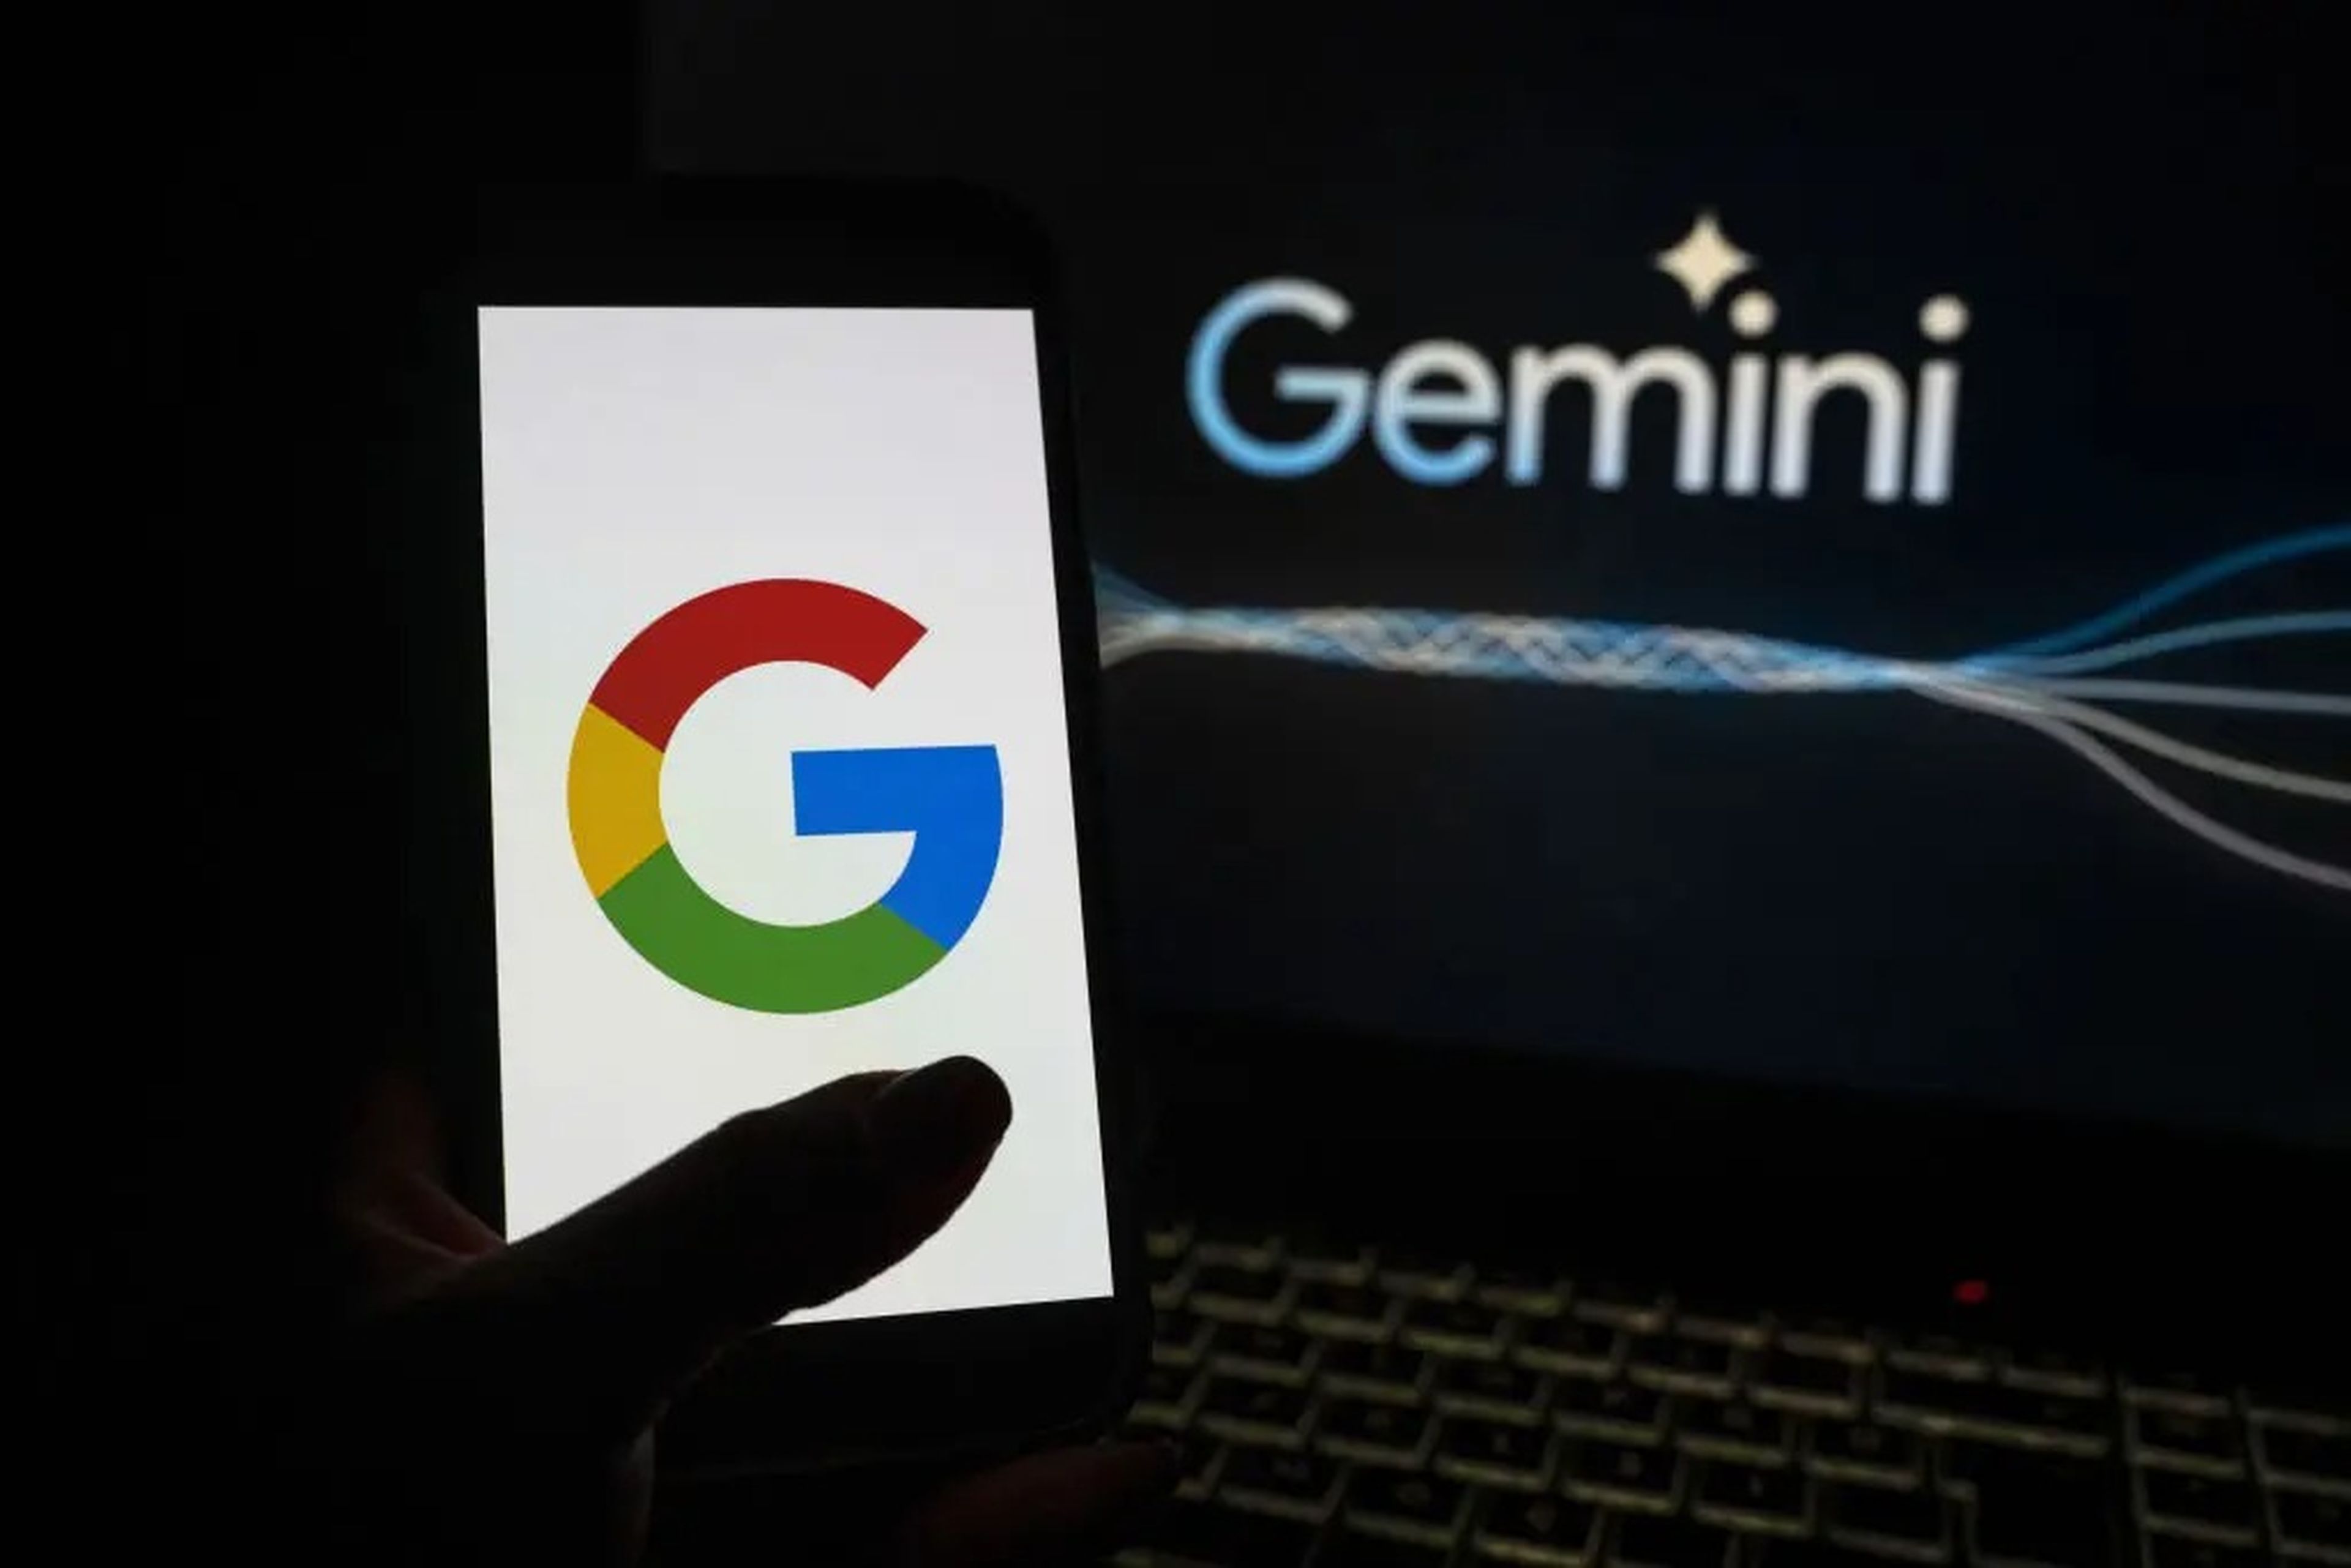 In this photo illustration the logo of 'Google' is displayed on a phone screen in front of a 'Google Gemini' logo.